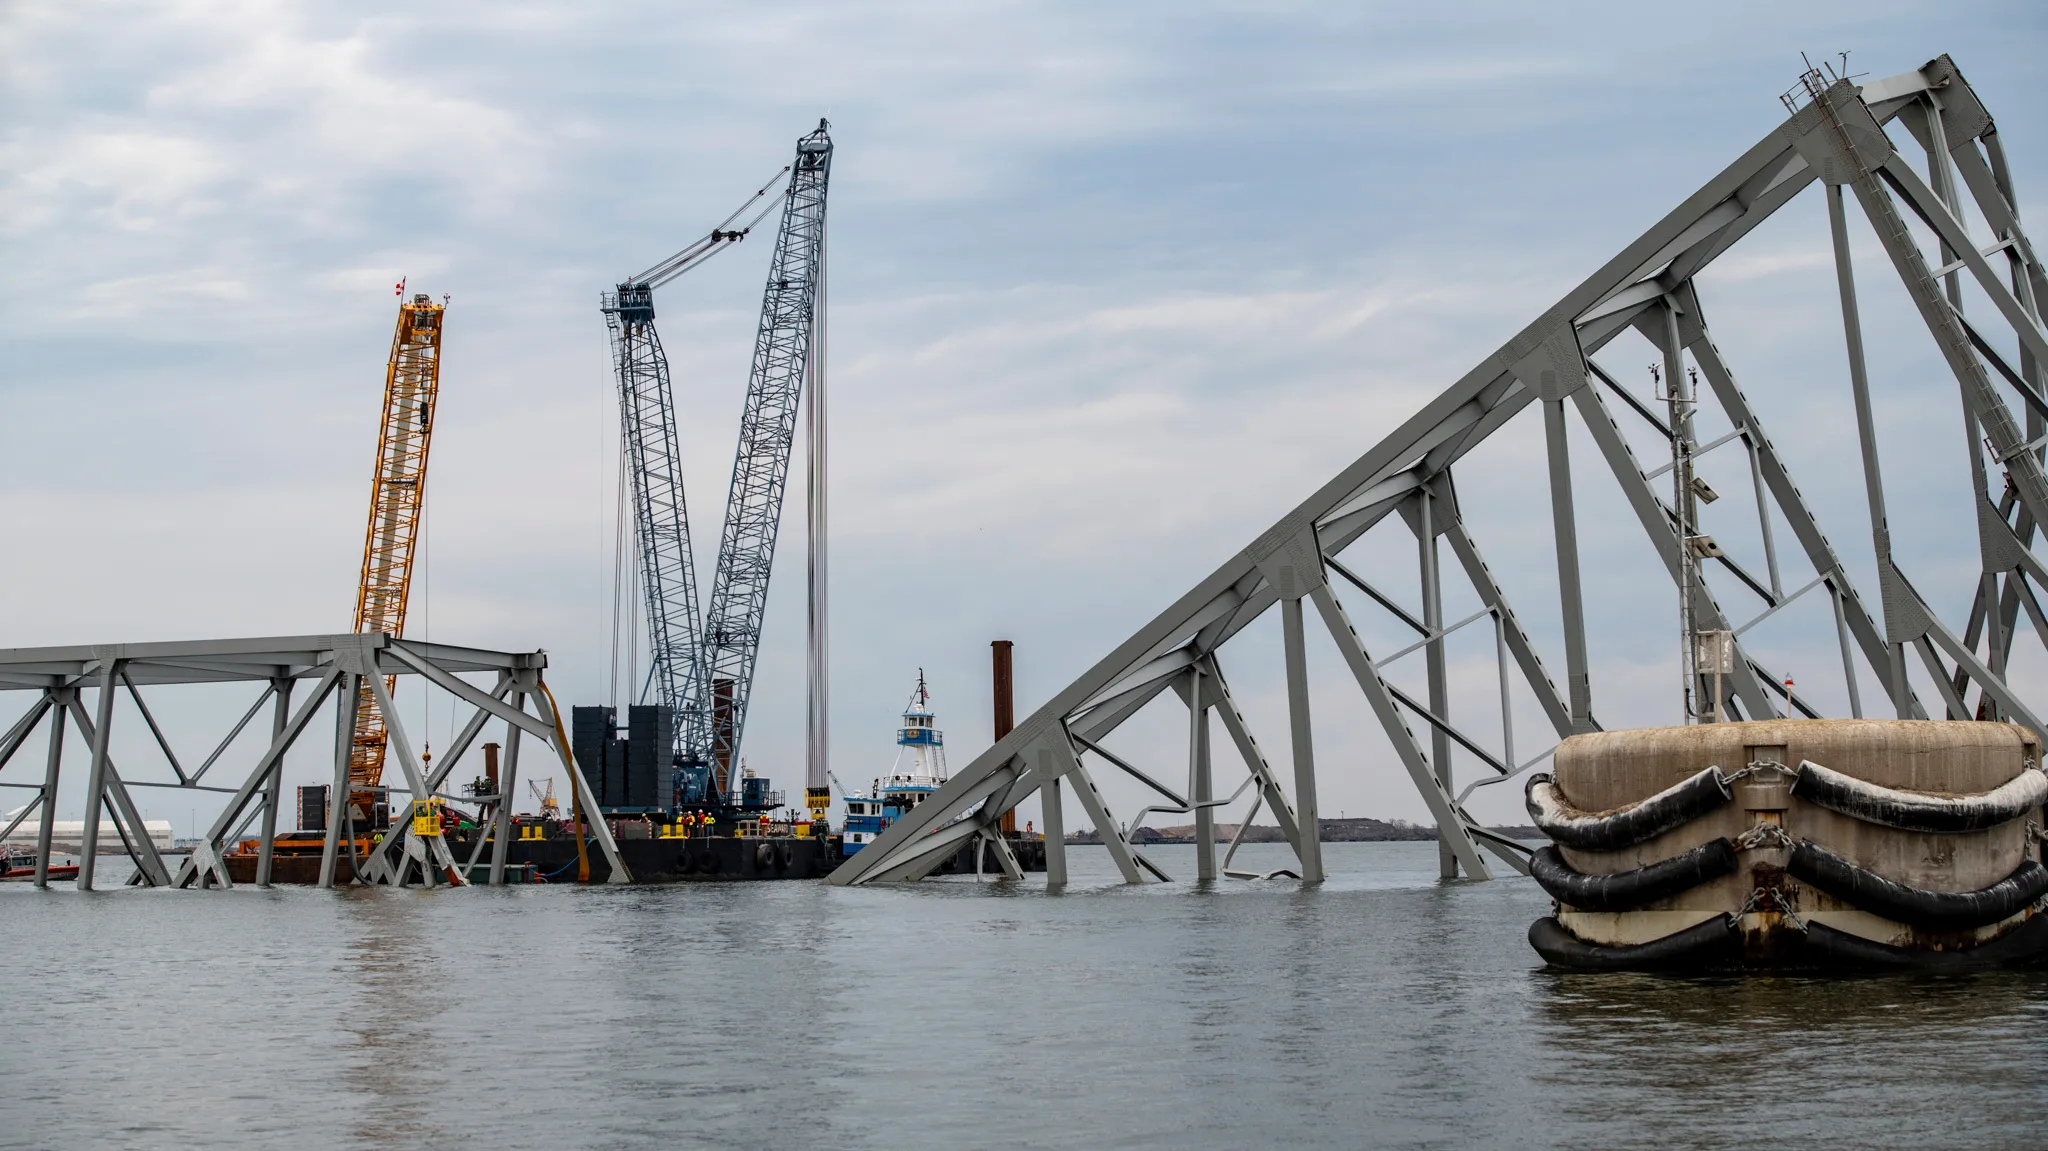 Maryland Governor Labels Baltimore Bridge Collapse as a 'National Economic Catastrophe'